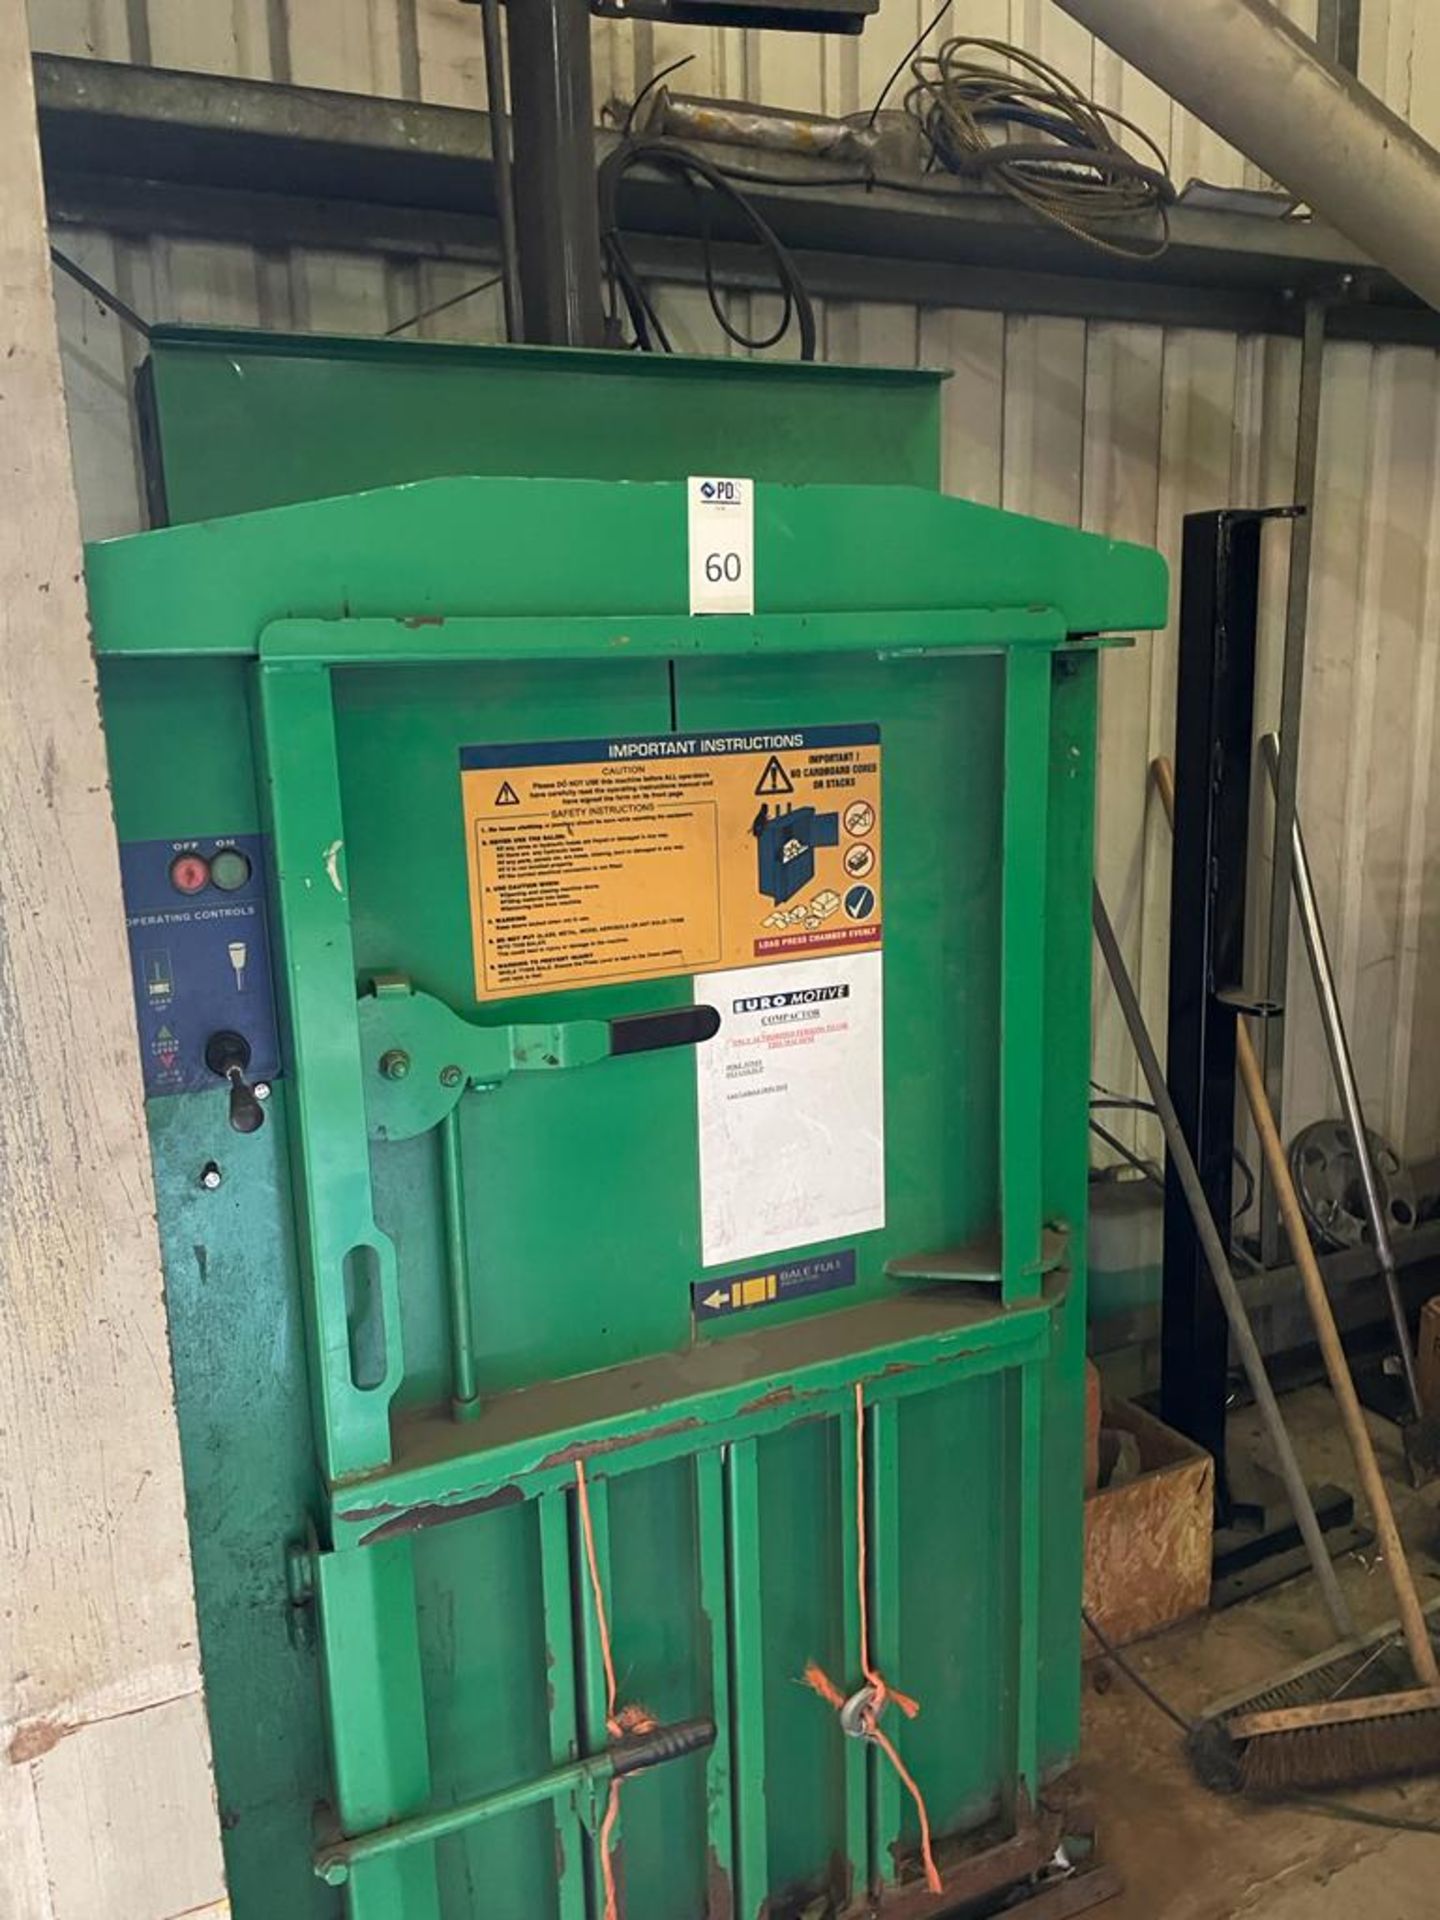 Unbadged Compactor Baler (Location Dover. Please Refer to General Notes)